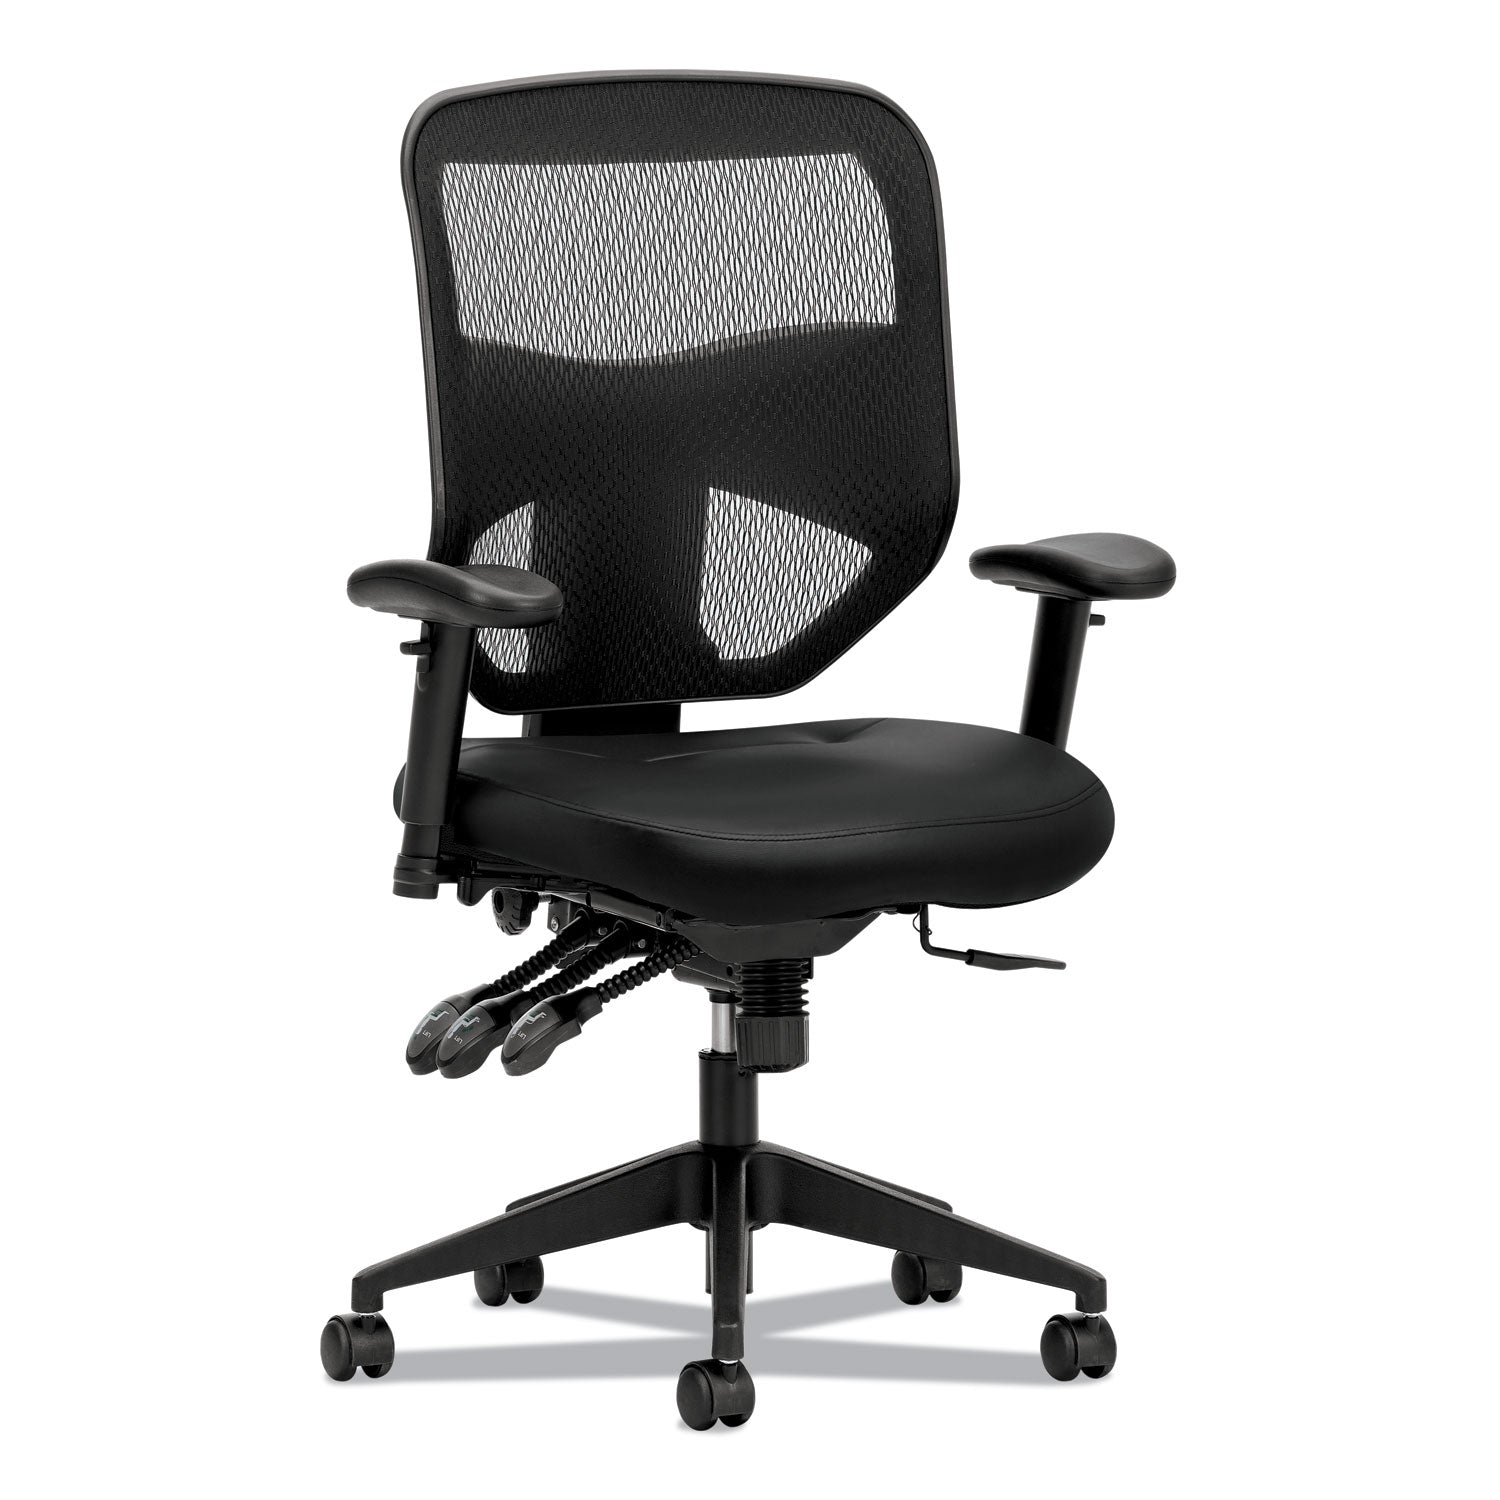 prominent-mesh-high-back-task-chair-supports-up-to-250-lb-17-to-21-seat-height-black_bsxvl532sb11 - 1